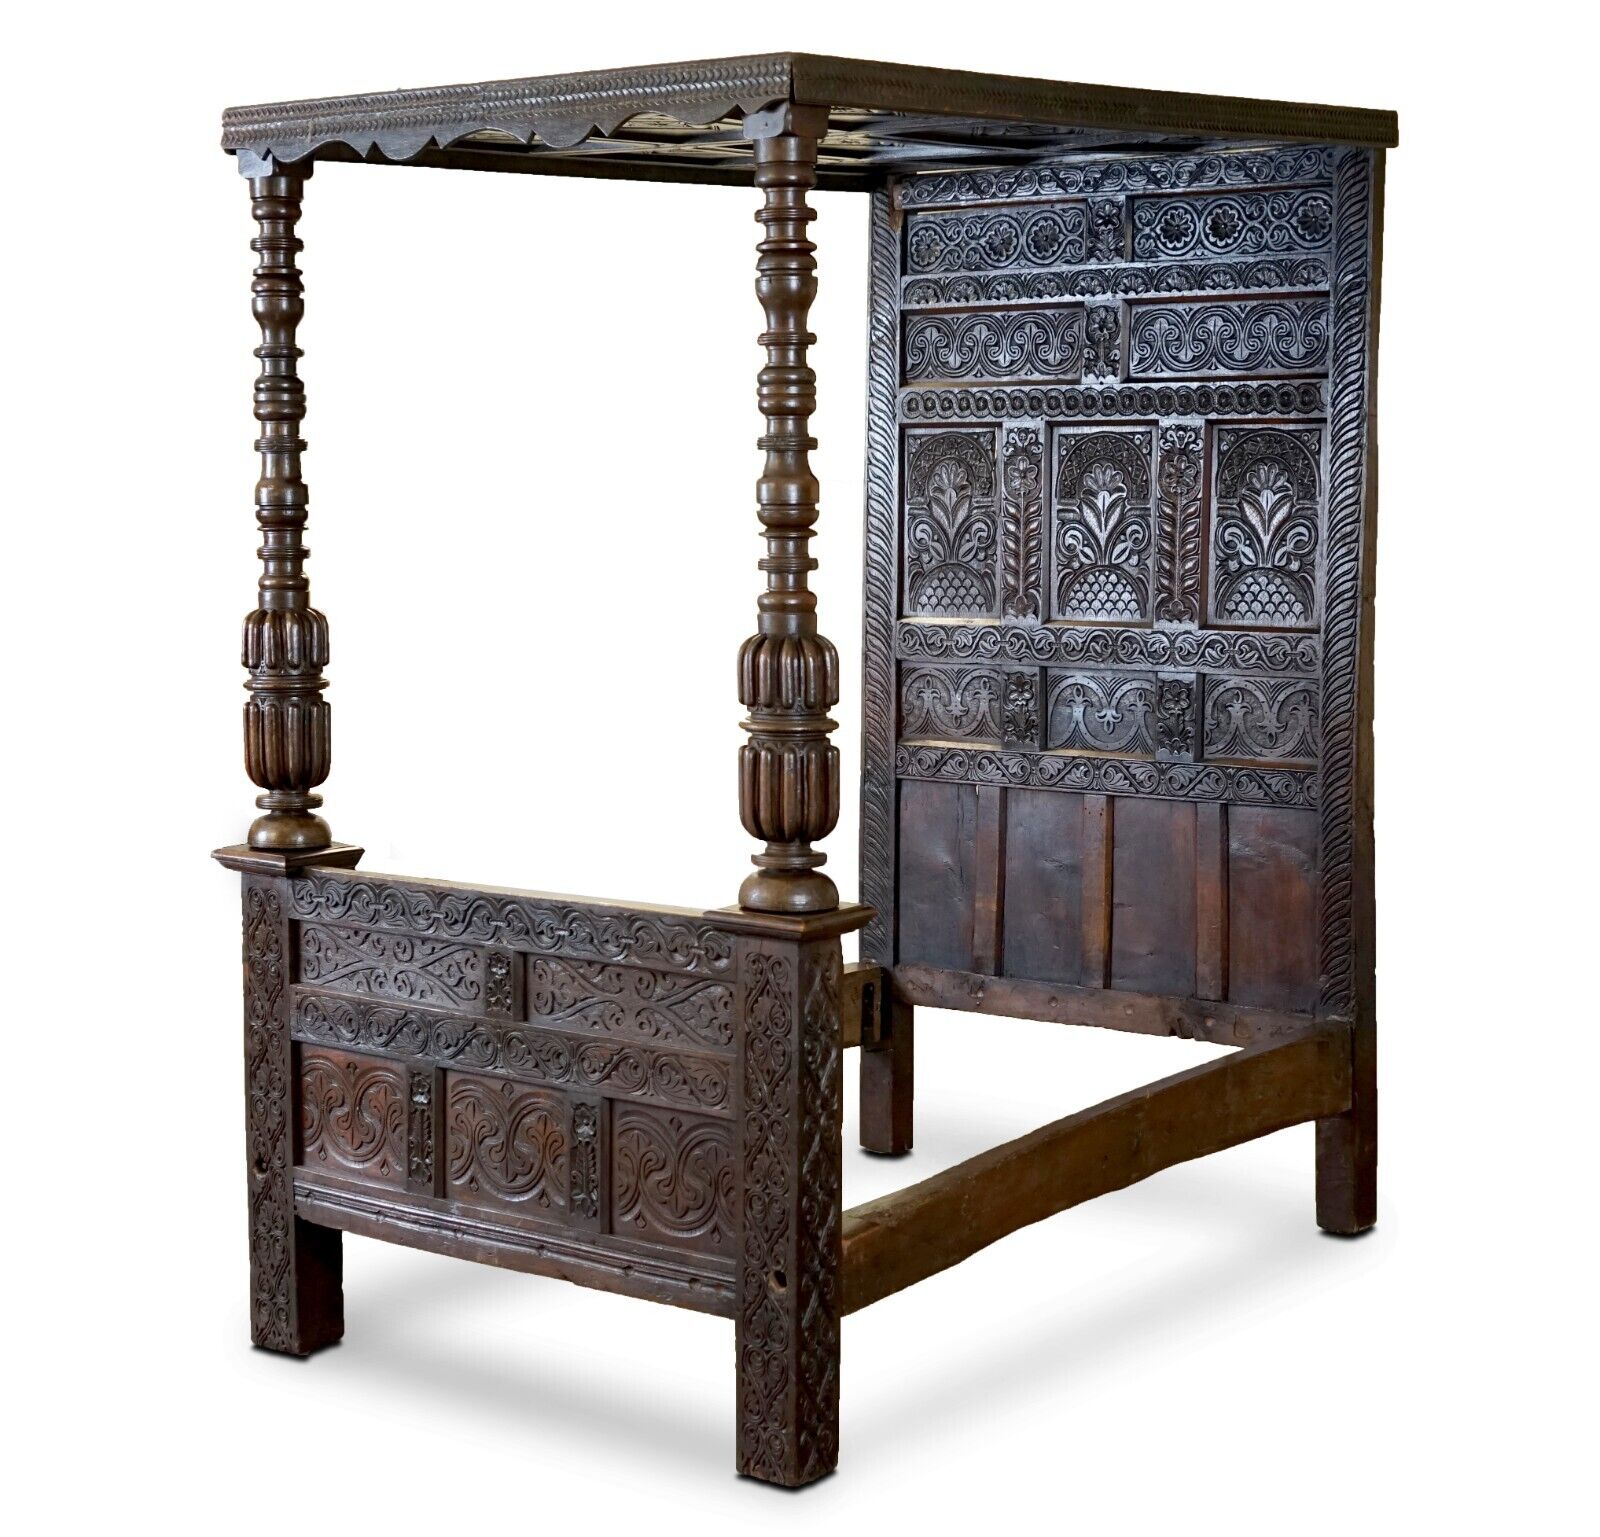 18TH CENTURY KING GEORGE I CIRCA 1700 ORNATELY CARVED JACOBEAN OAK TESTER BED